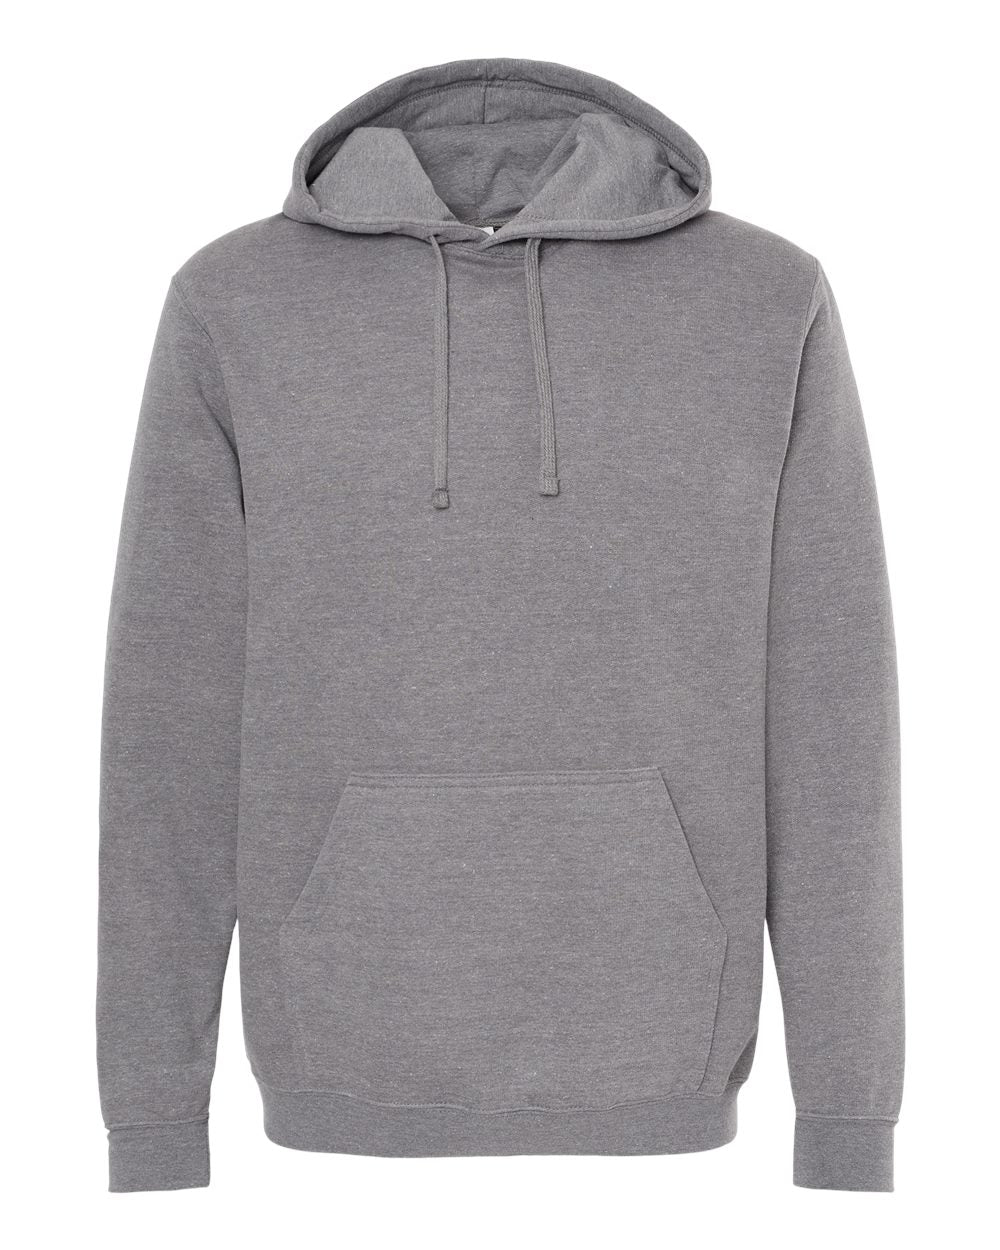 M&O Unisex Pullover Hoodie 3320 #color_Heather Grey